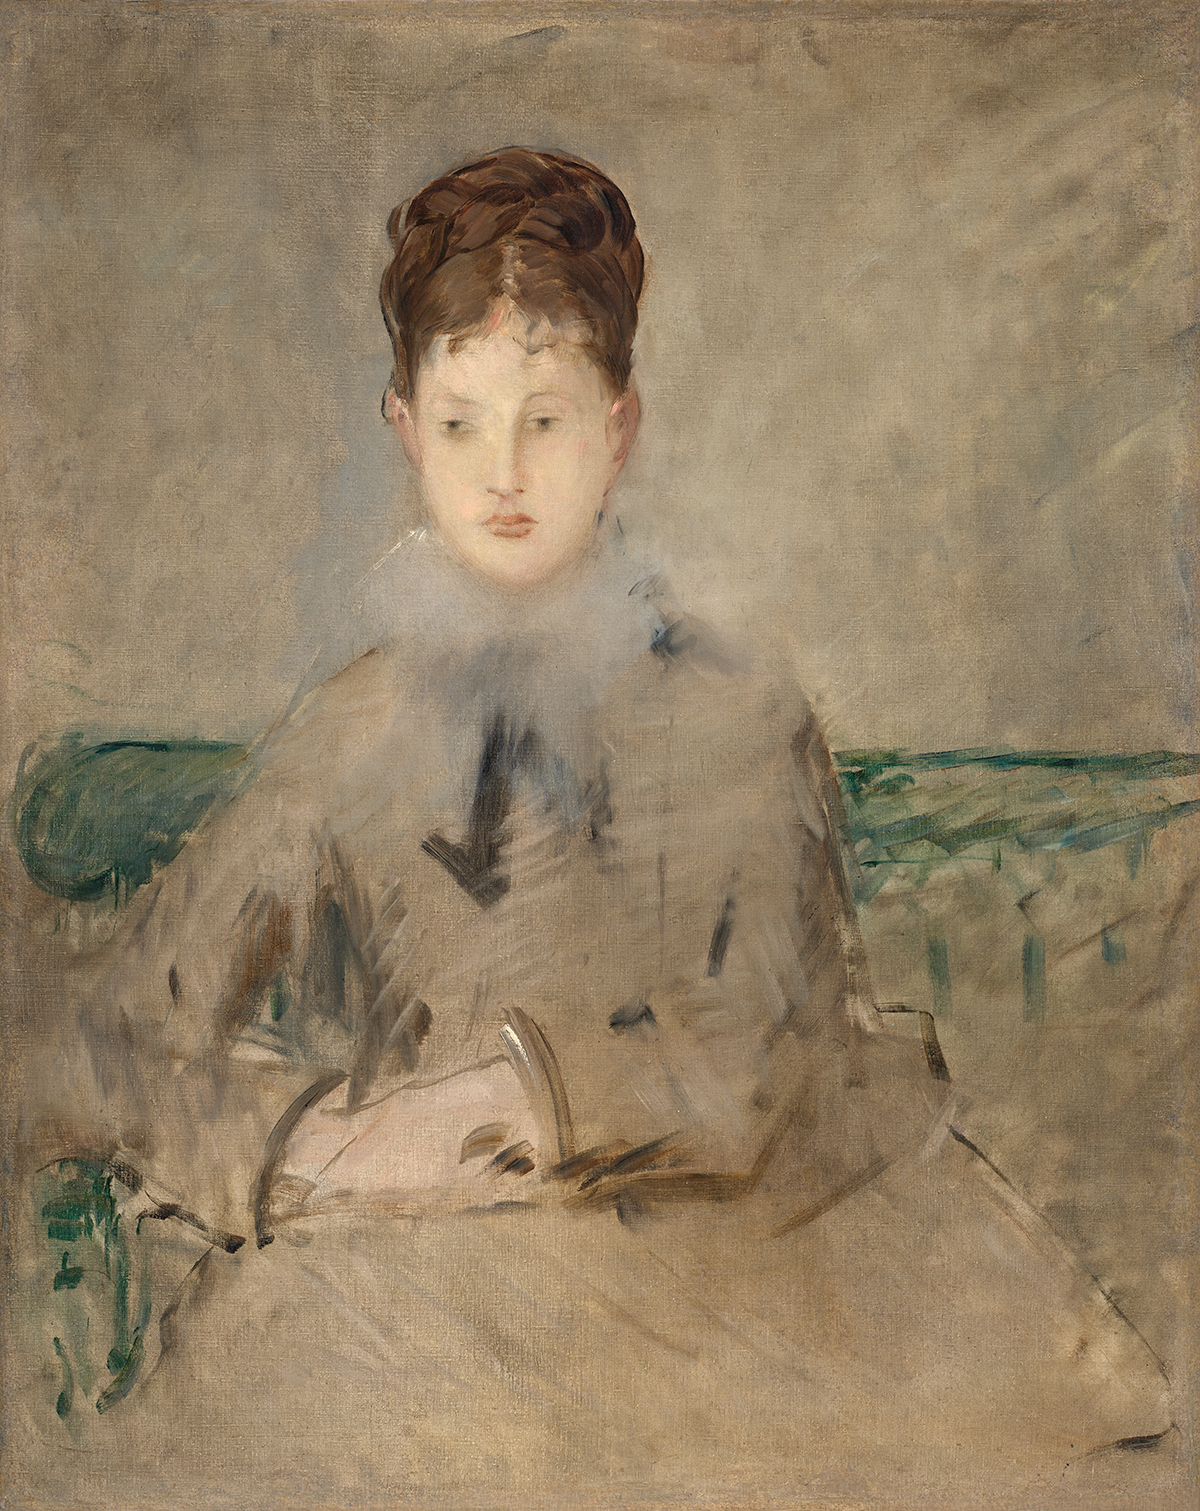 Painting of a woman in high-collared dress seated on a green chair.